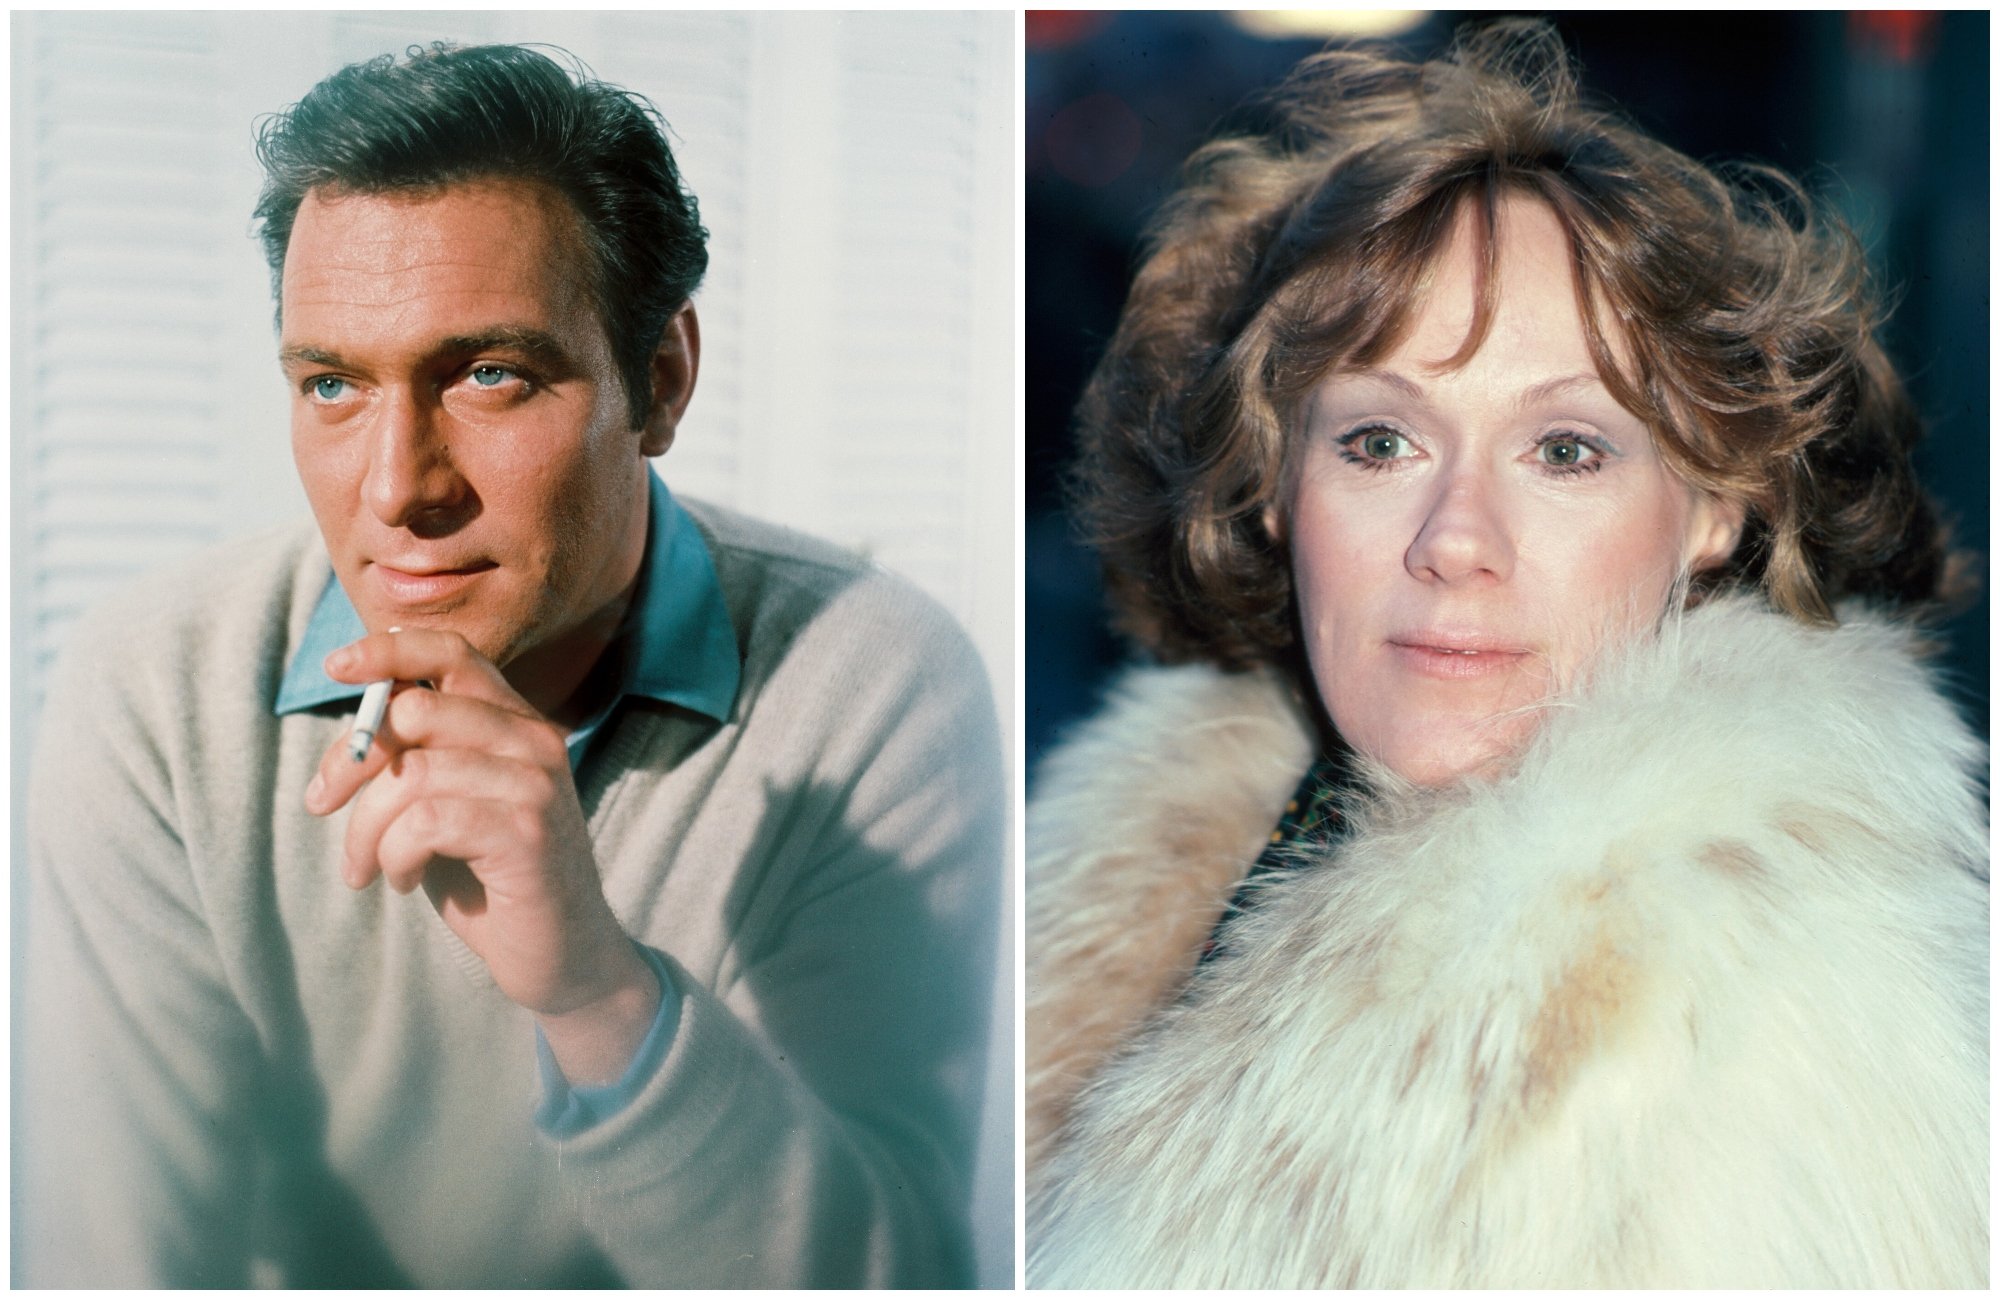 composite image of Christopher Plummer and Tammy Grimes